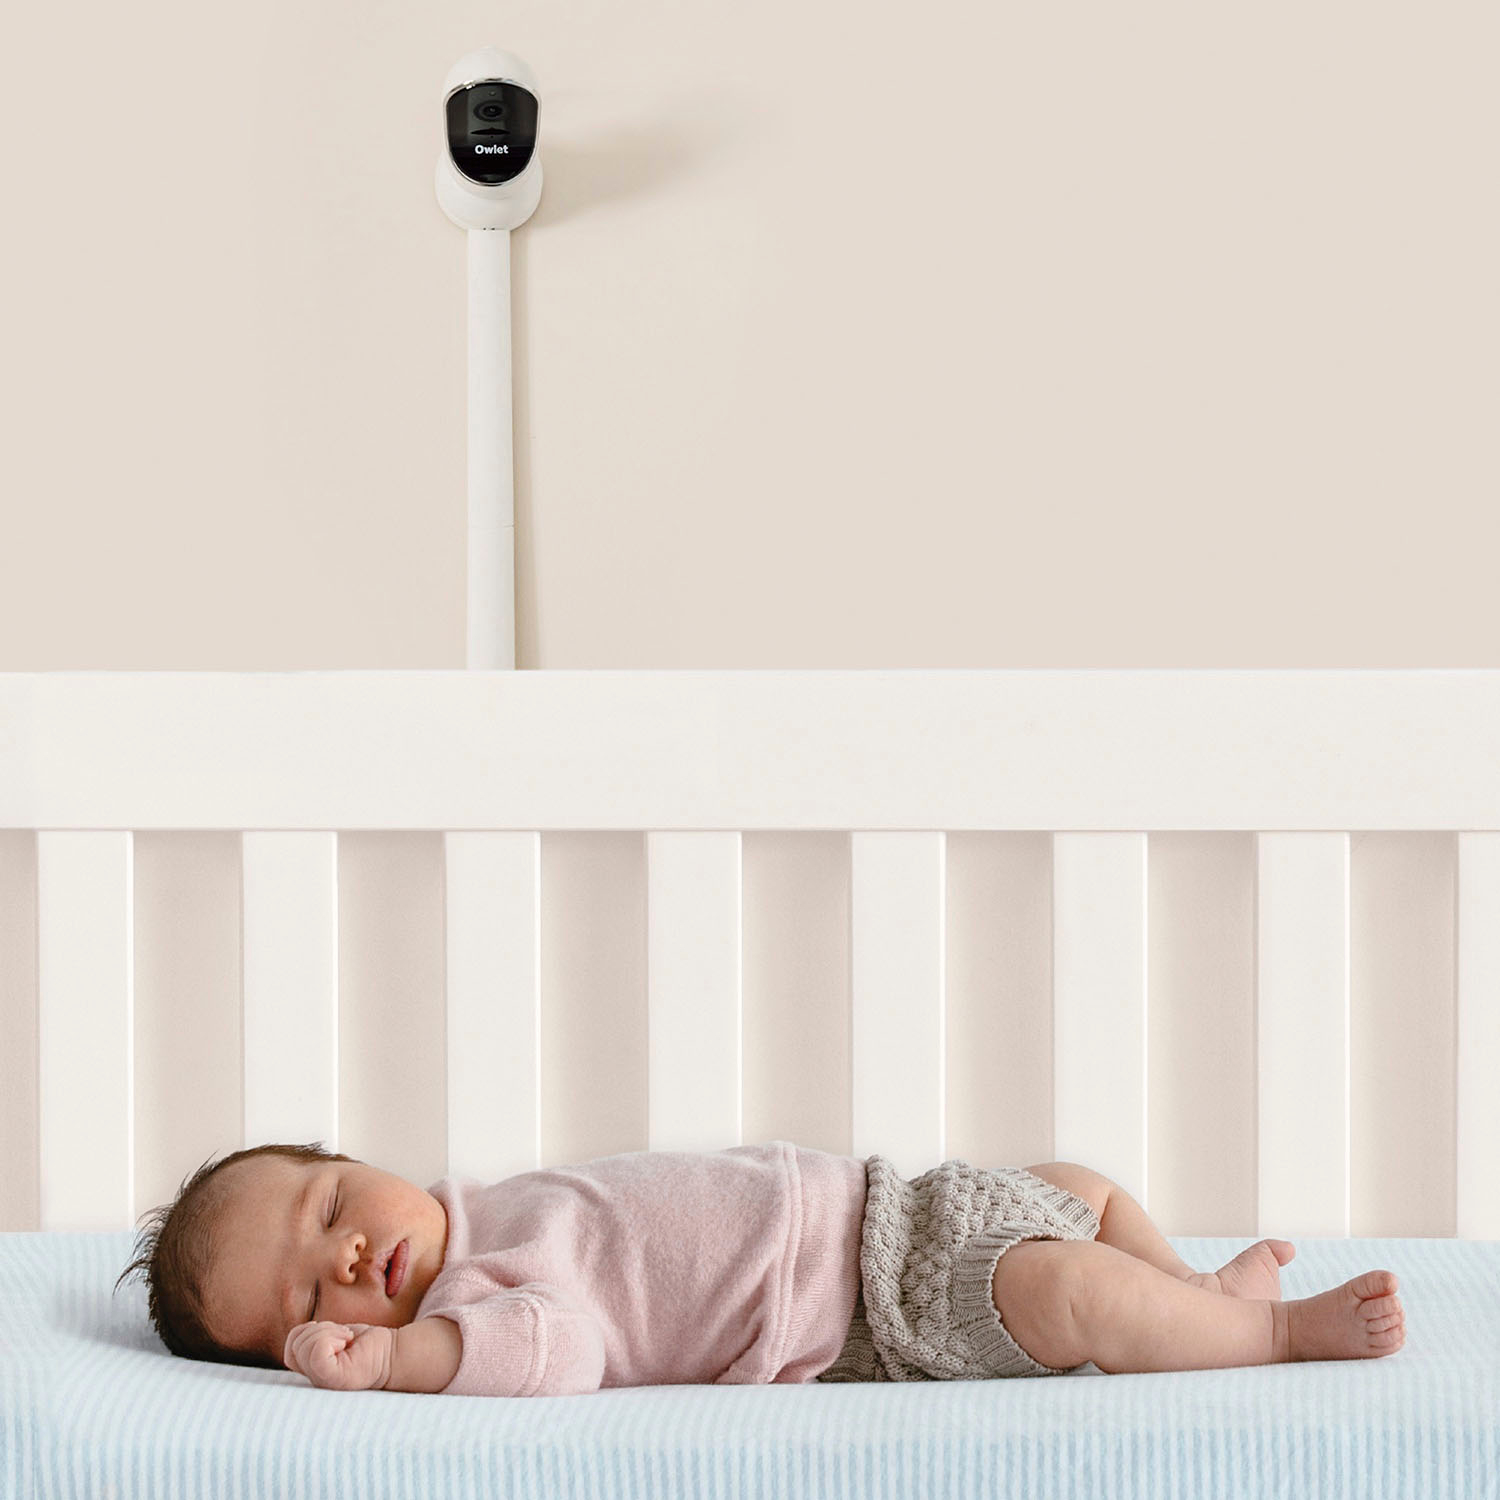 Left View: BabySense - Video Baby Monitor with (2) 2.4GHz Cameras and 3.5" Screen